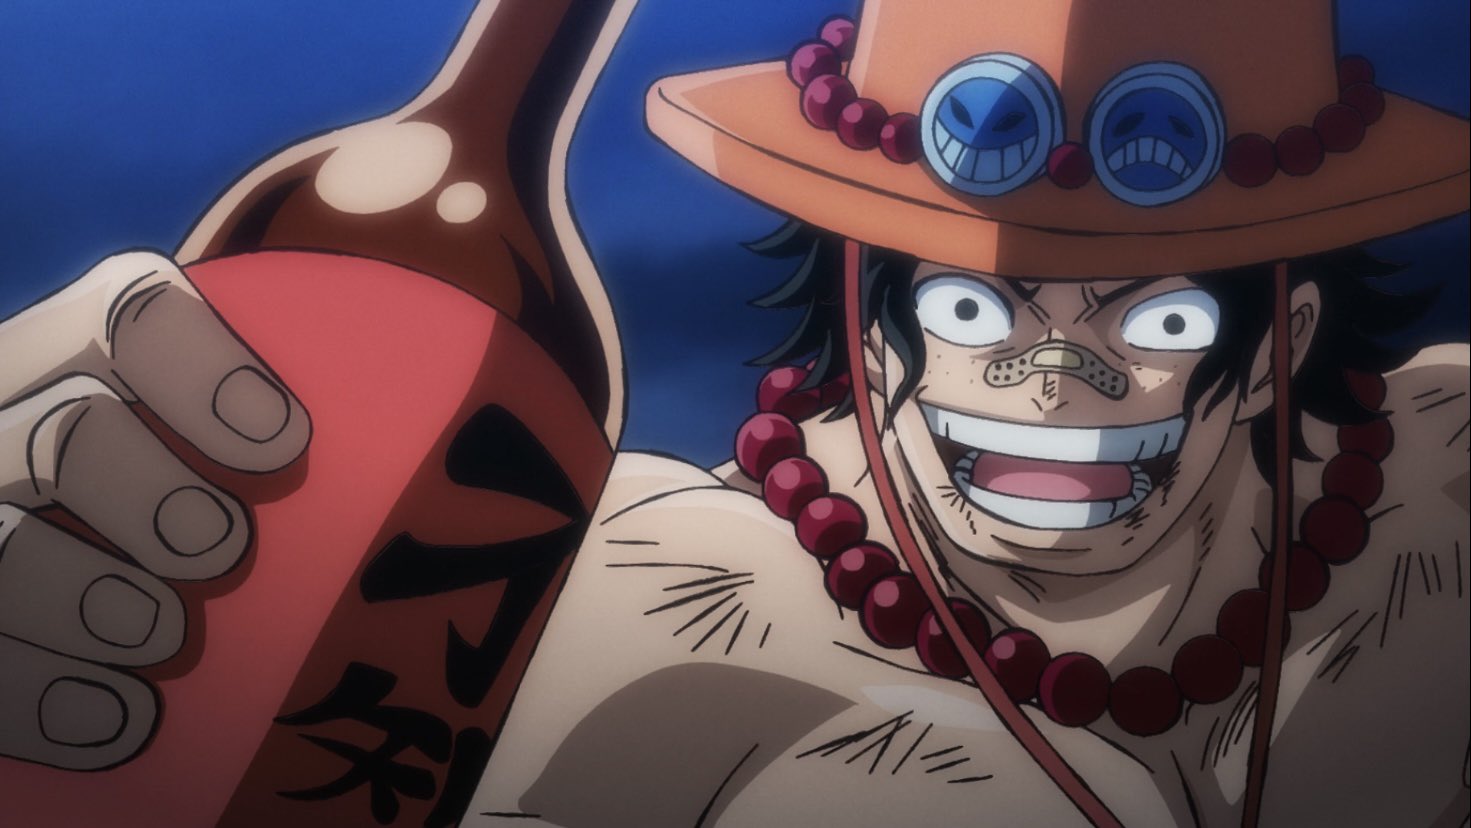 10 Questions: One Piece Multiple Choice Quiz